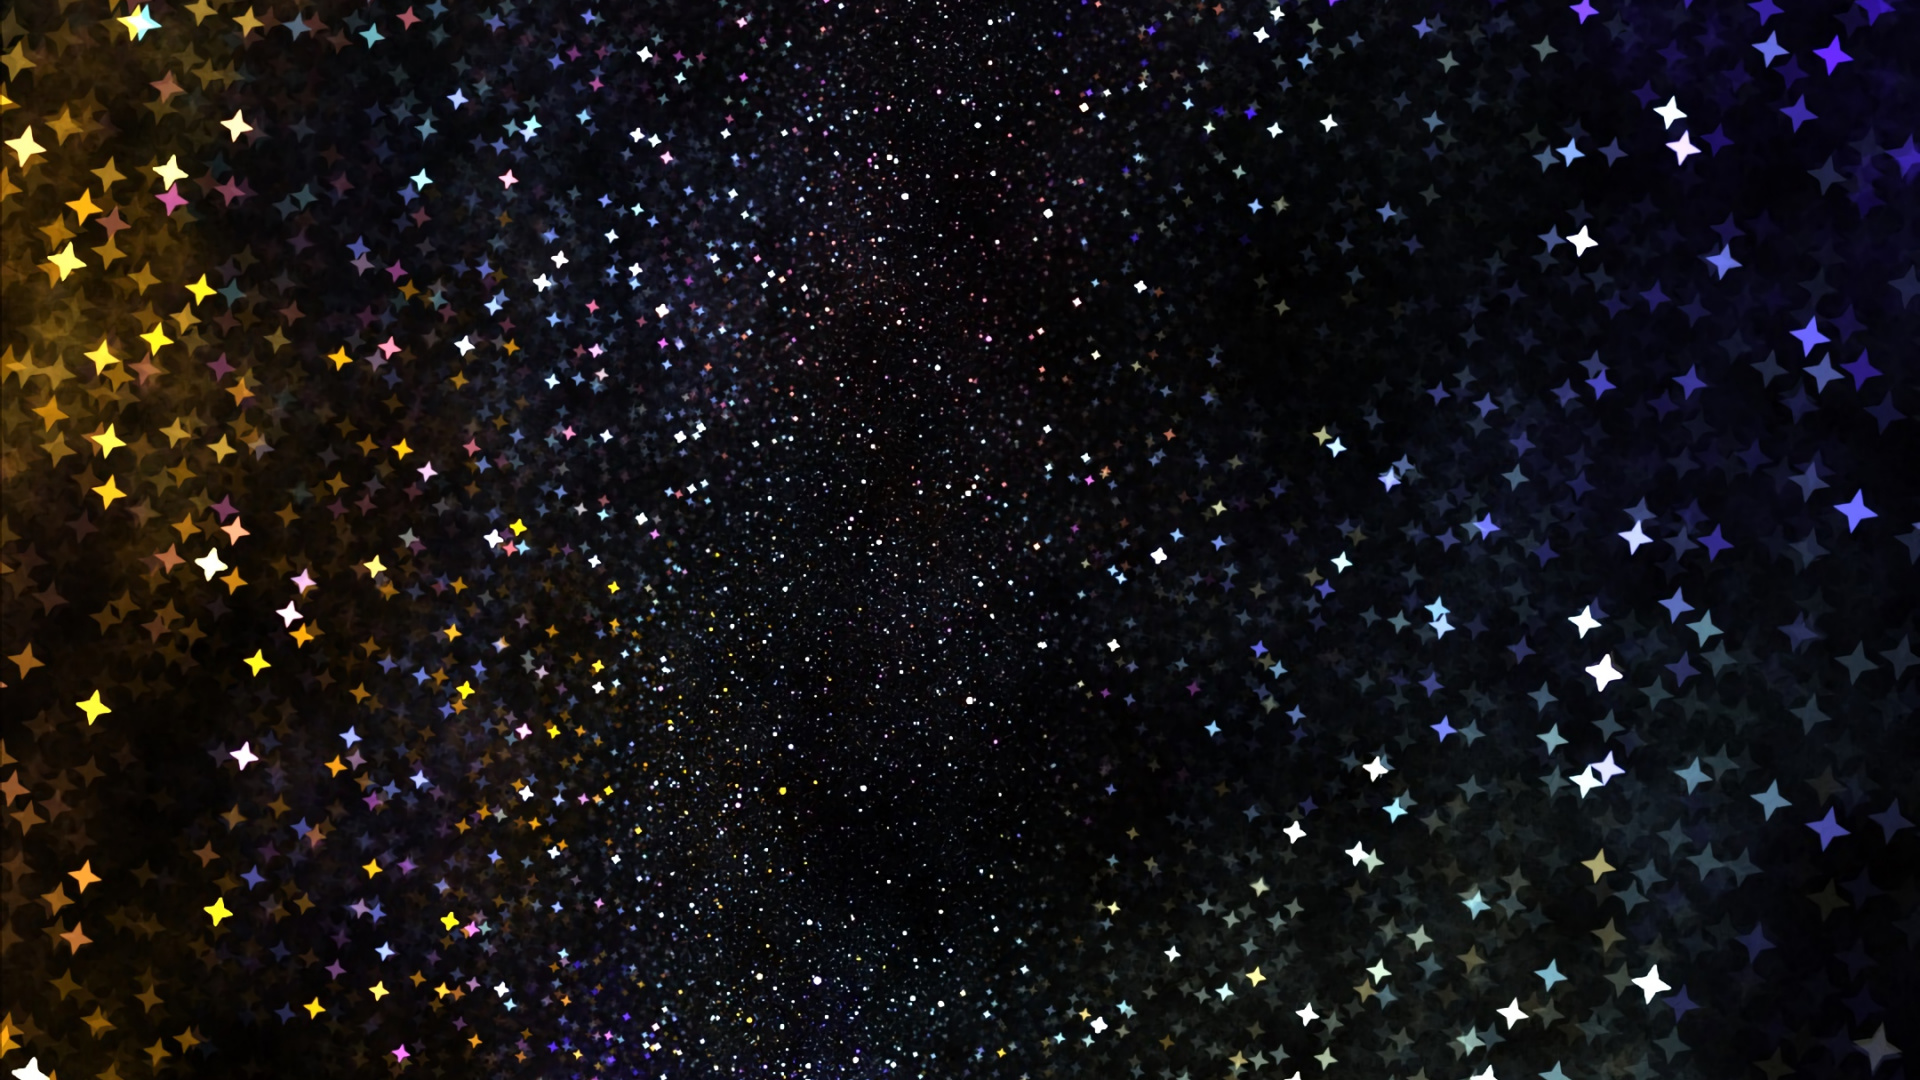 Starry Night Sky Over Starry Night. Wallpaper in 1920x1080 Resolution